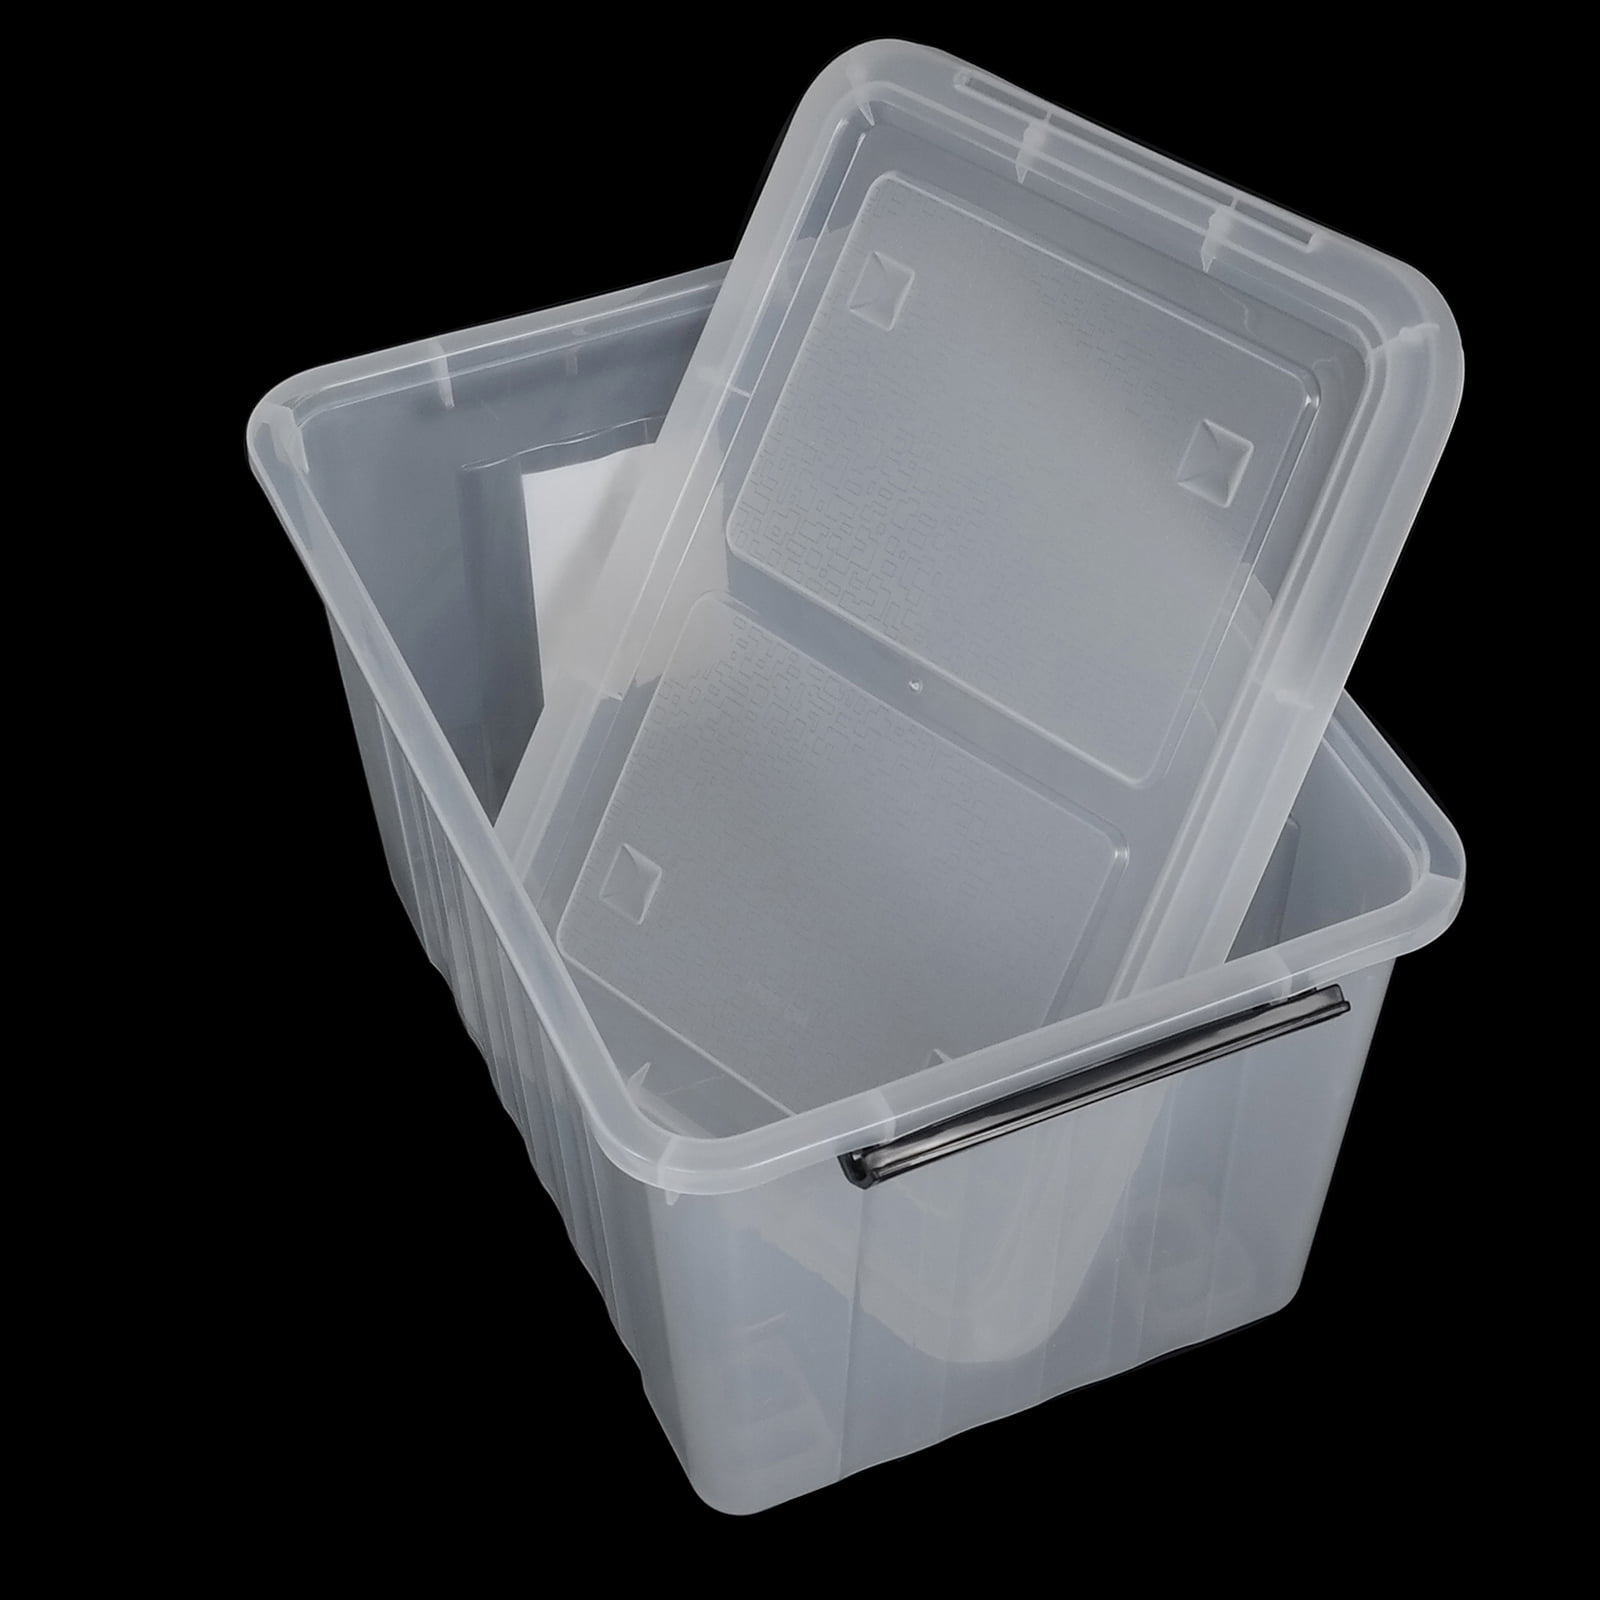 Waikhomes Set of 4 Large Plastic Storage Box with Lid, 30 L Latching  Storage Box Bin, Clear